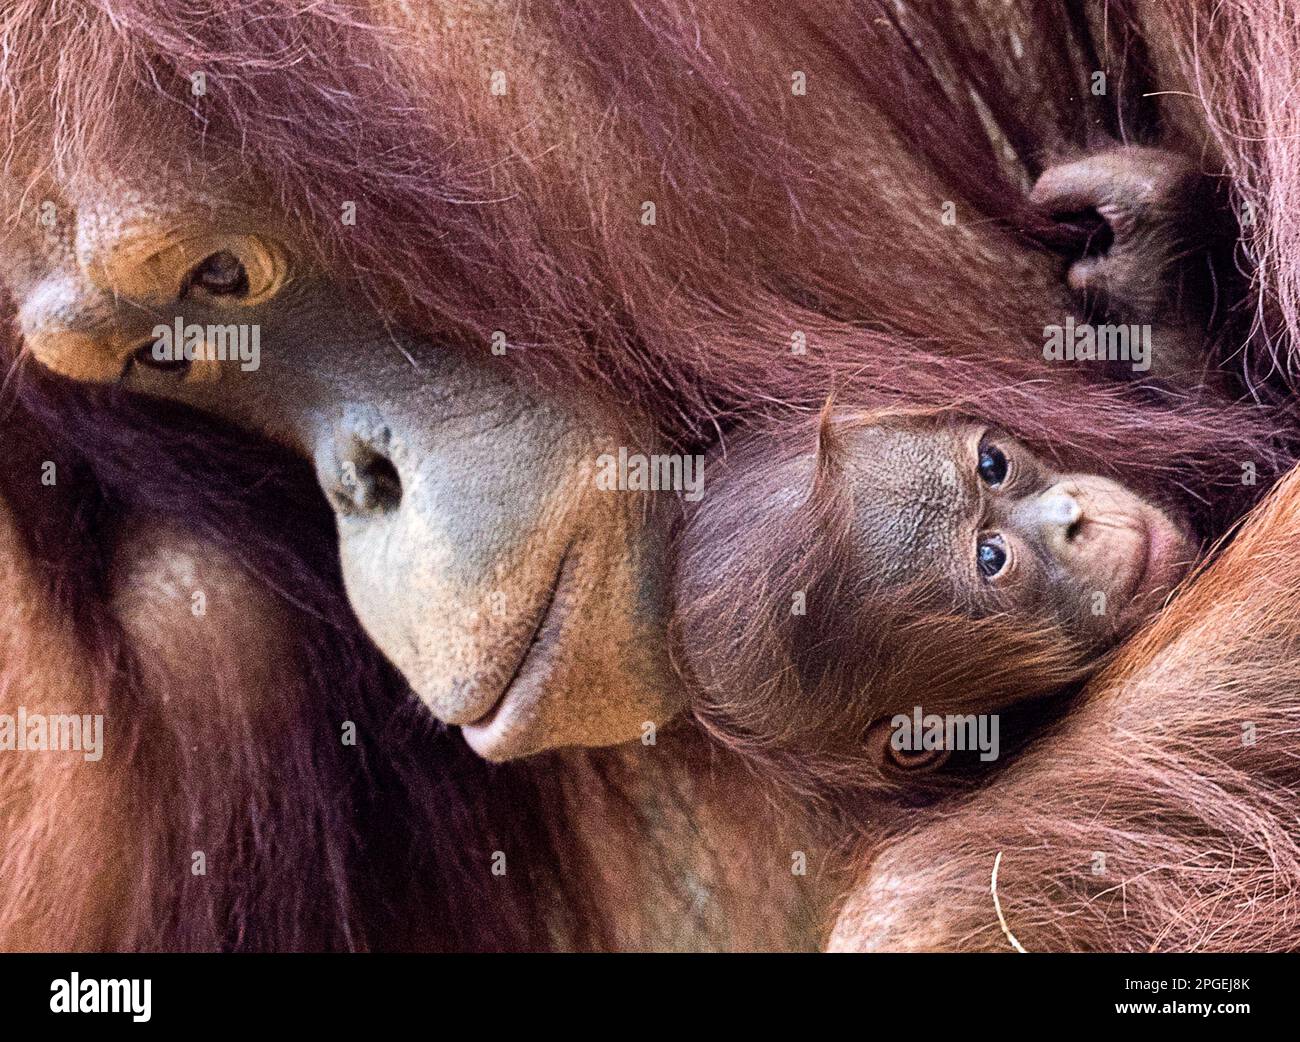 Rostock, Germany. 22nd Mar, 2023. Eleven-year-old female orangutan Cantik holds her offspring in her arms at Rostock Zoo. The orangutan girl was noticed at around 7 p.m. on March 14, 2023. It is reportedly the seventh orangutan child since the Darwineum - the home of the great apes at Rostock Zoo - opened in 2012. Credit: Jens Büttner/dpa/Alamy Live News Stock Photo